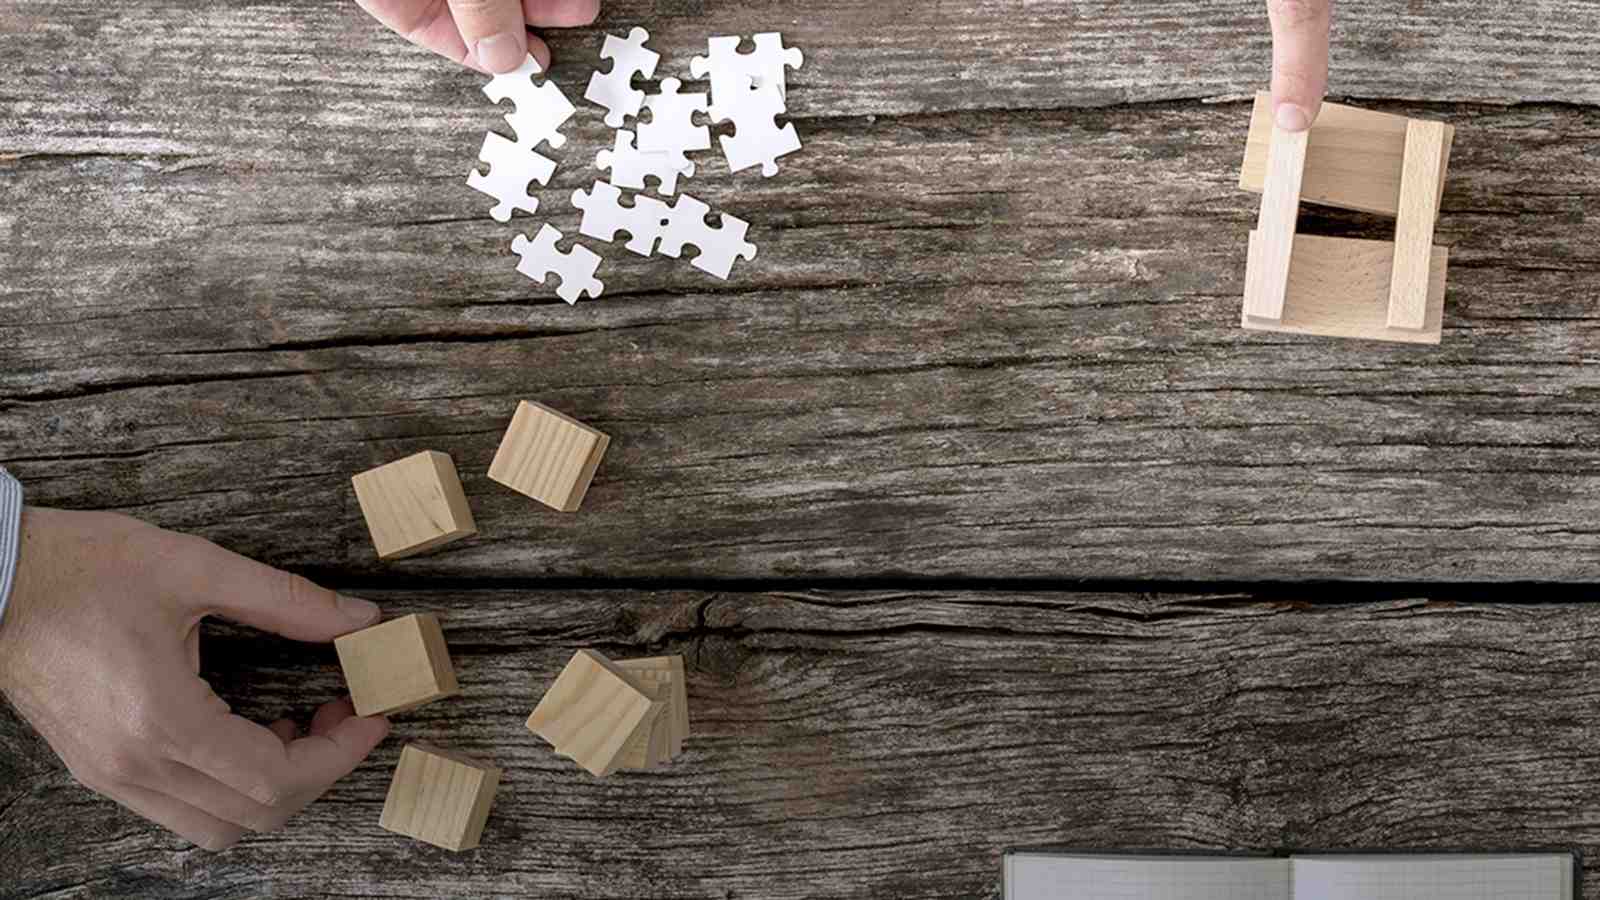 An overview of a wooden table with hands moving small cubes, puzzle pieces and small pieces of wood.